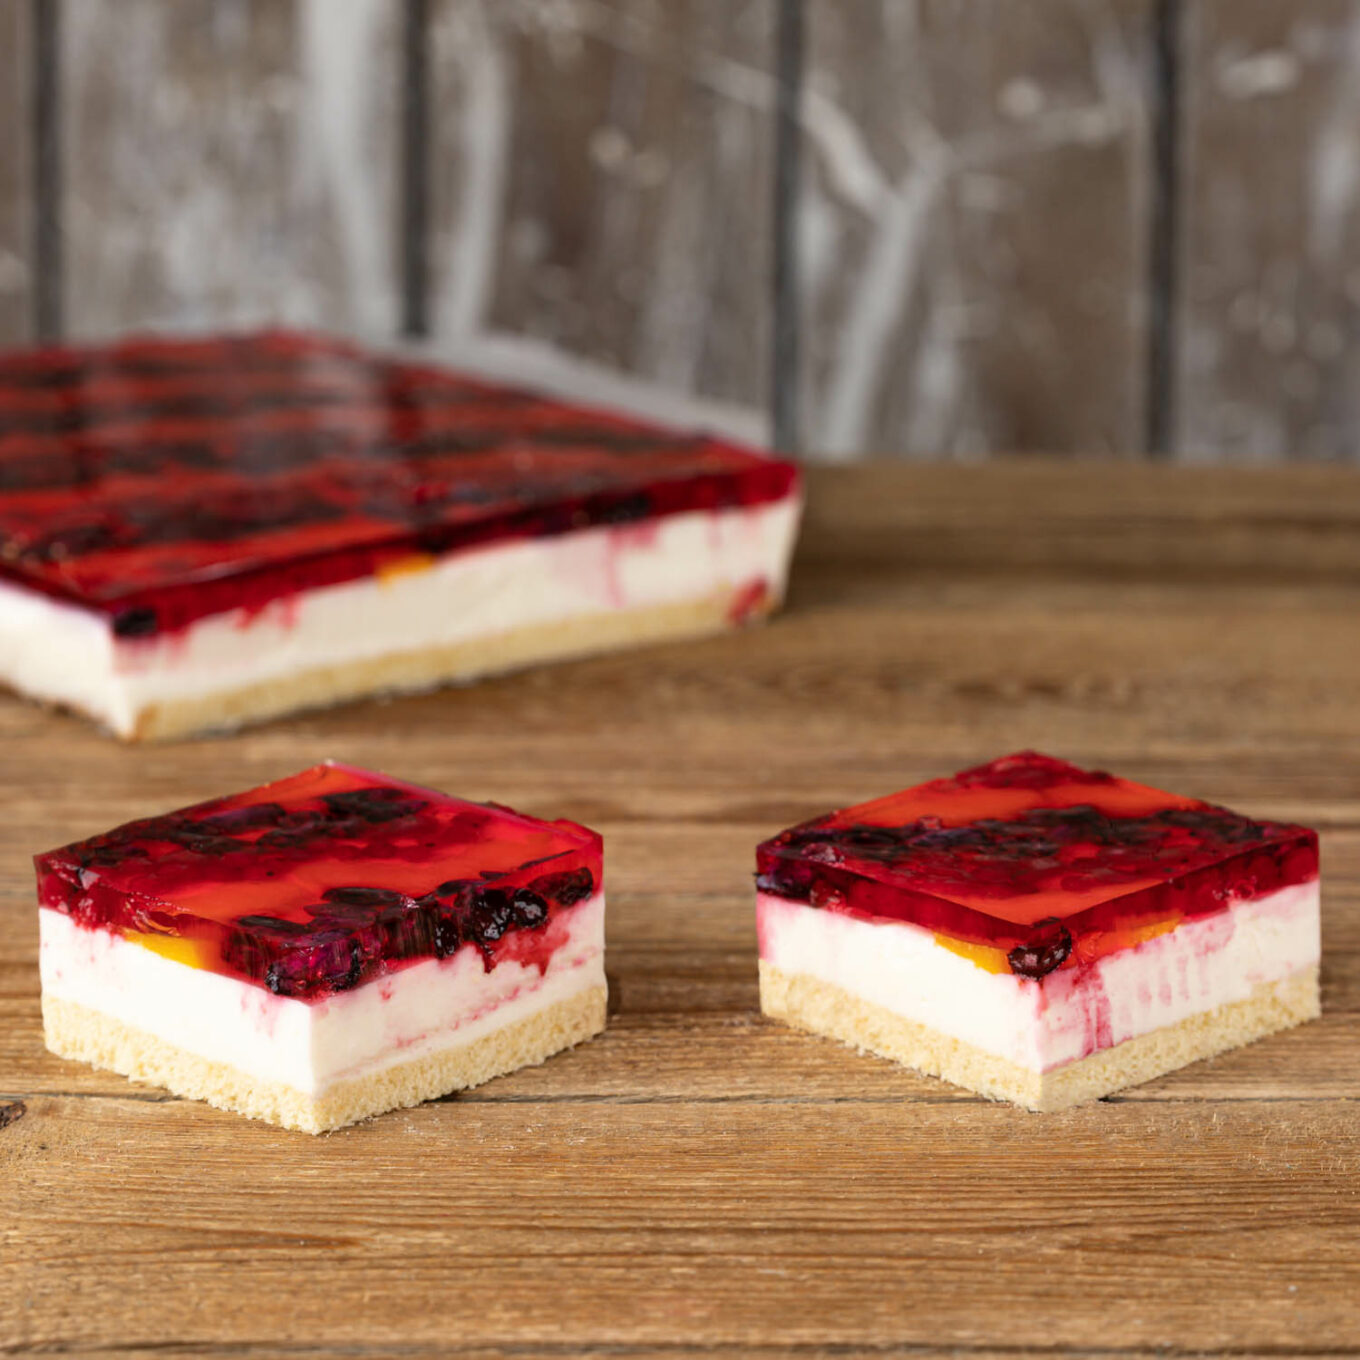 Cold cheesecake with jelly and fruit Confectionery Jacek Placek is synonymous with the taste of homemade cakes made from natural products.